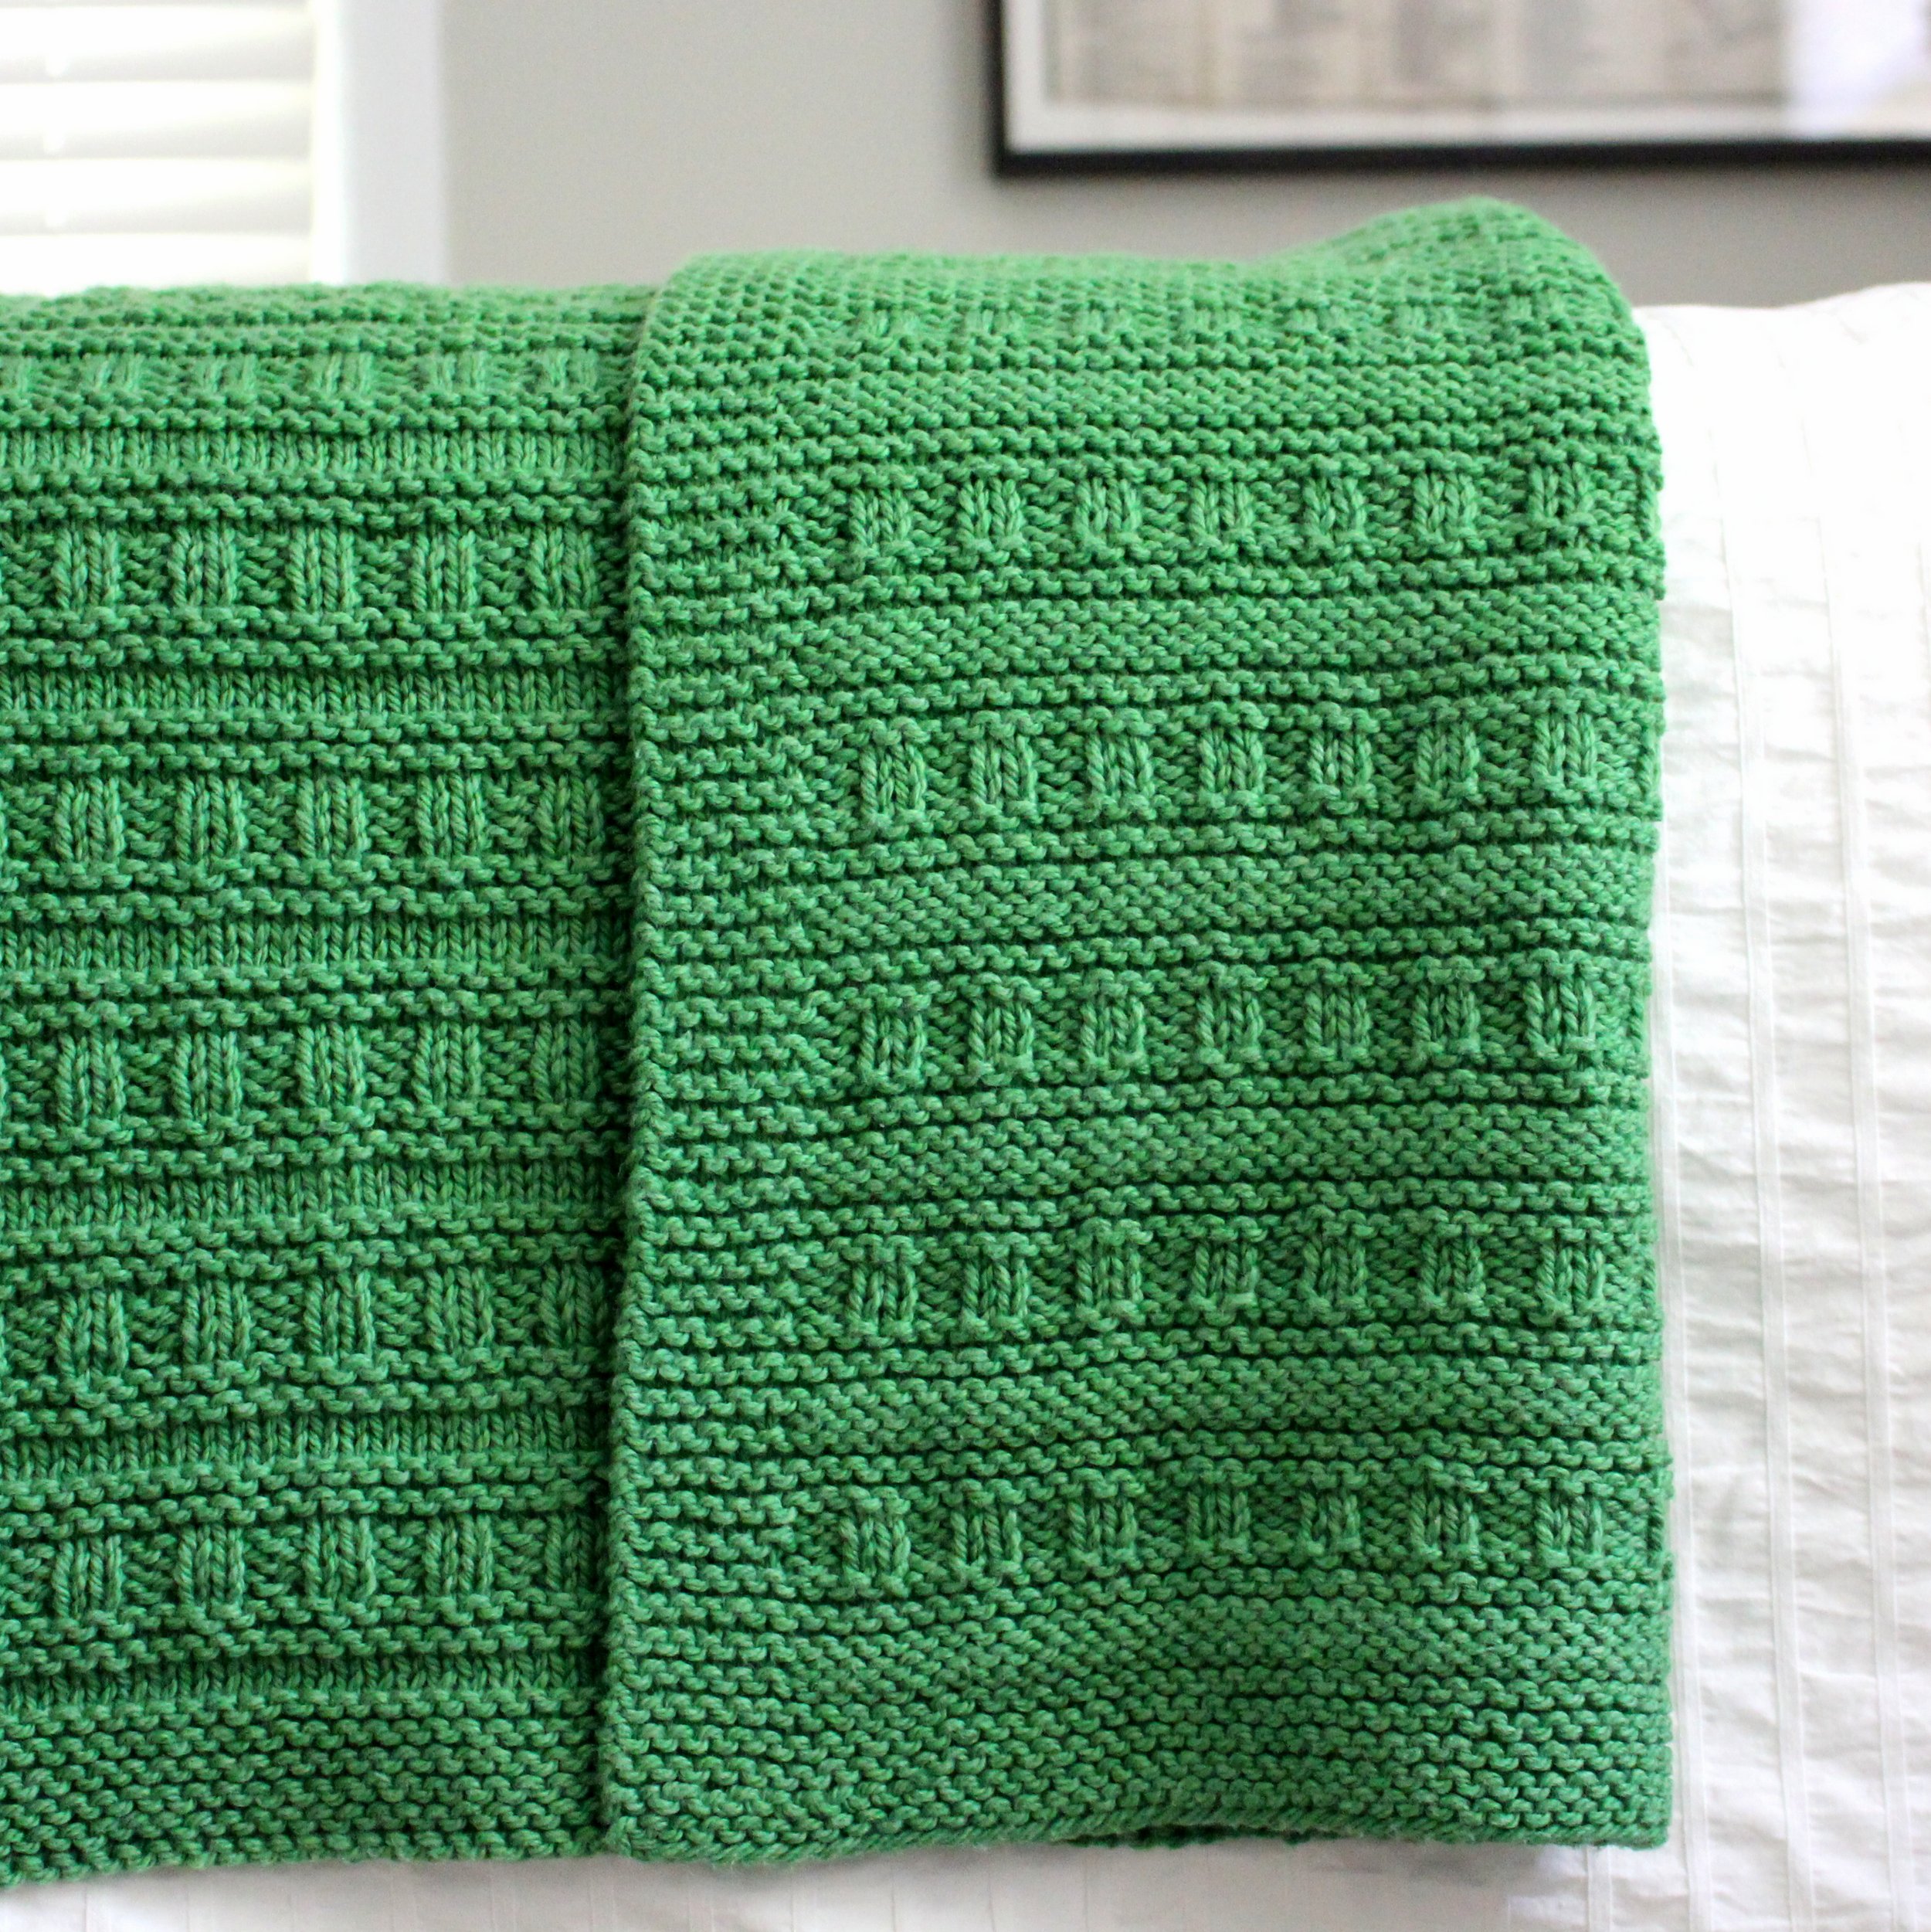 On the Bright Side Blanket knitting pattern a look at back of the blanket wrong side BEST MAY 2023.JPG